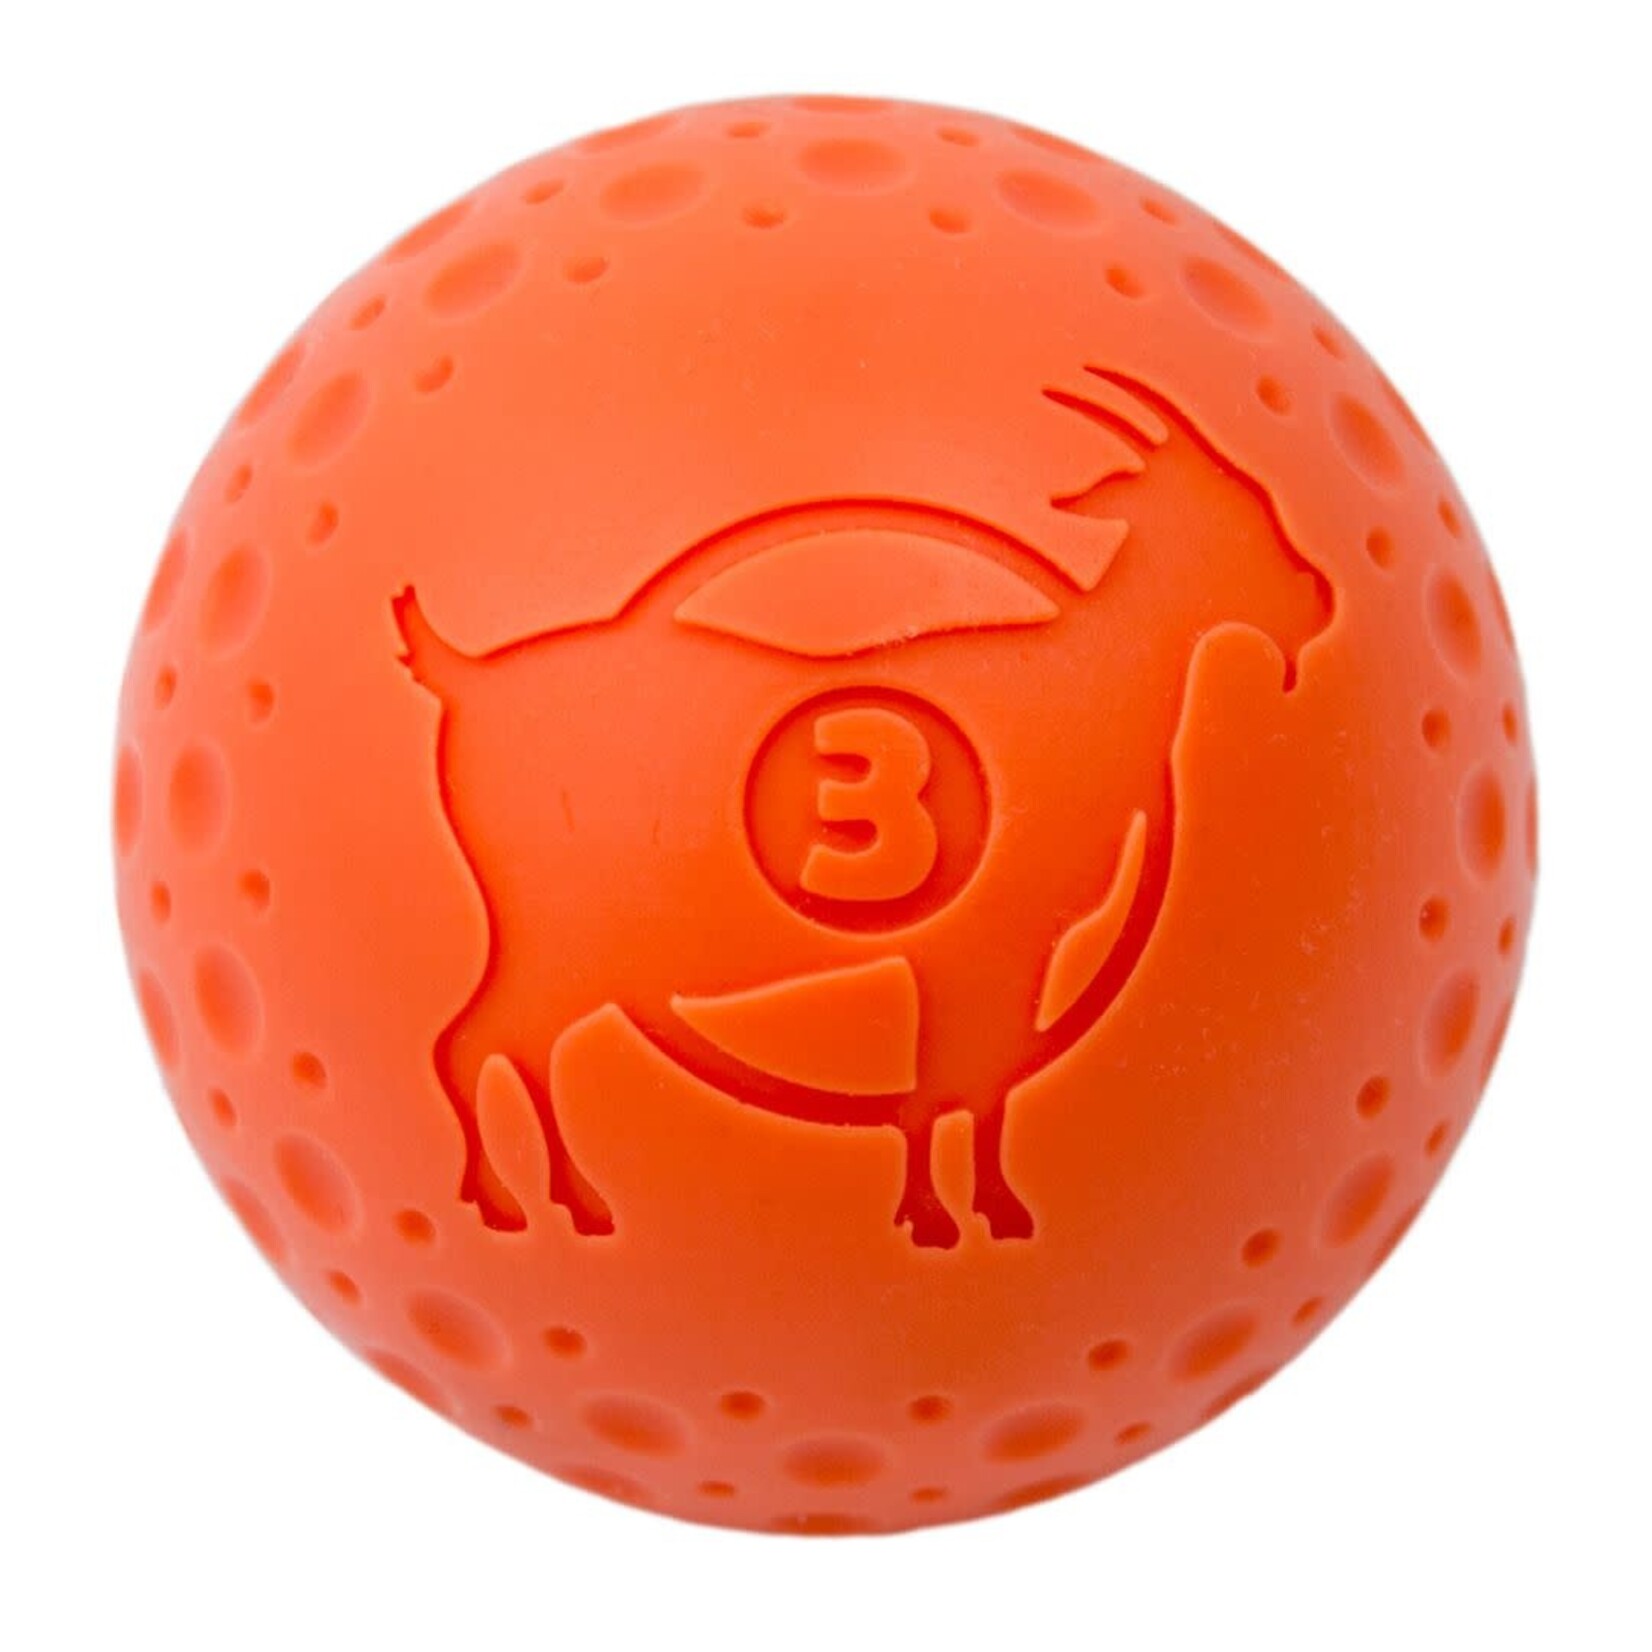 Tall Tails Tall Tails Natural Rubber GOAT Sport Ball